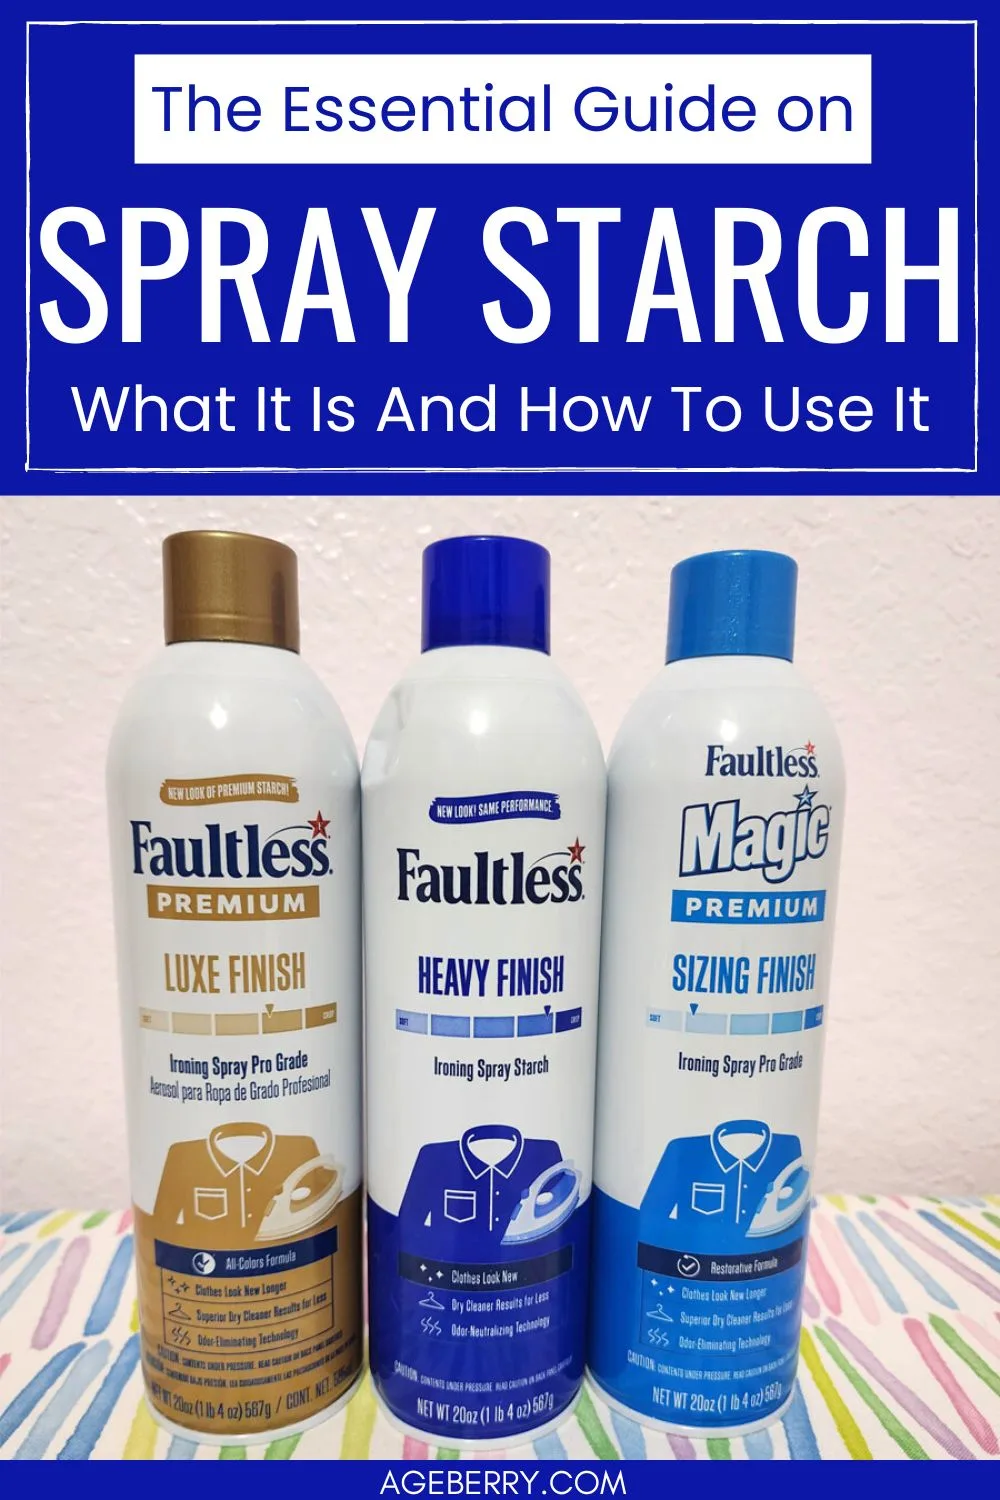 The Essential Guide to Spray Starch_ What It Is And How To Use It